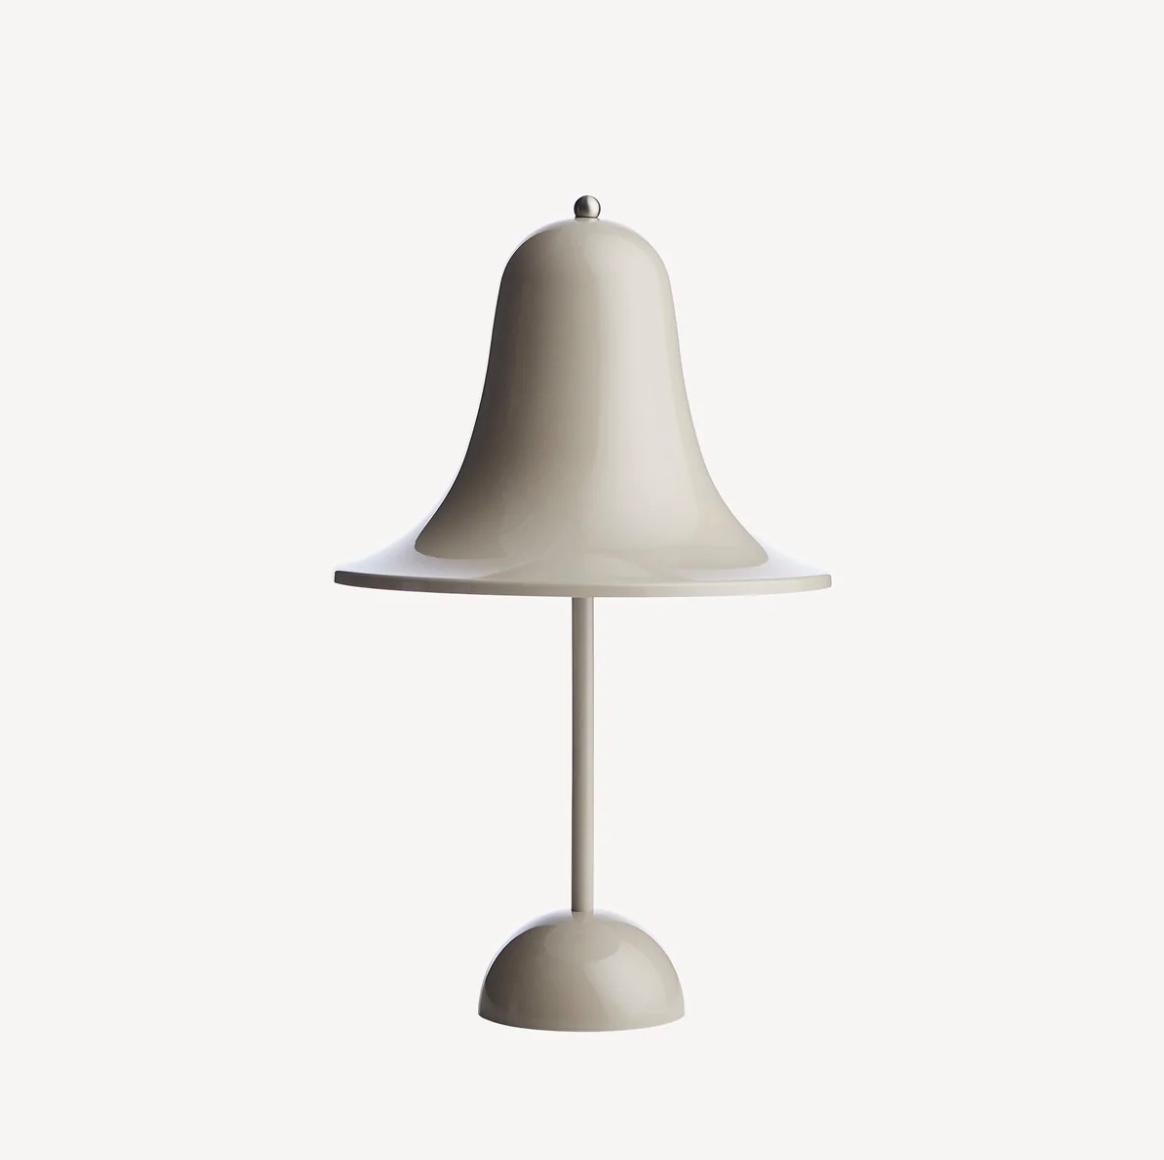 Contemporary Verner Panton 'Pantop Portable' Wireless Table Lamp in 'Terracotta' for Verpan For Sale